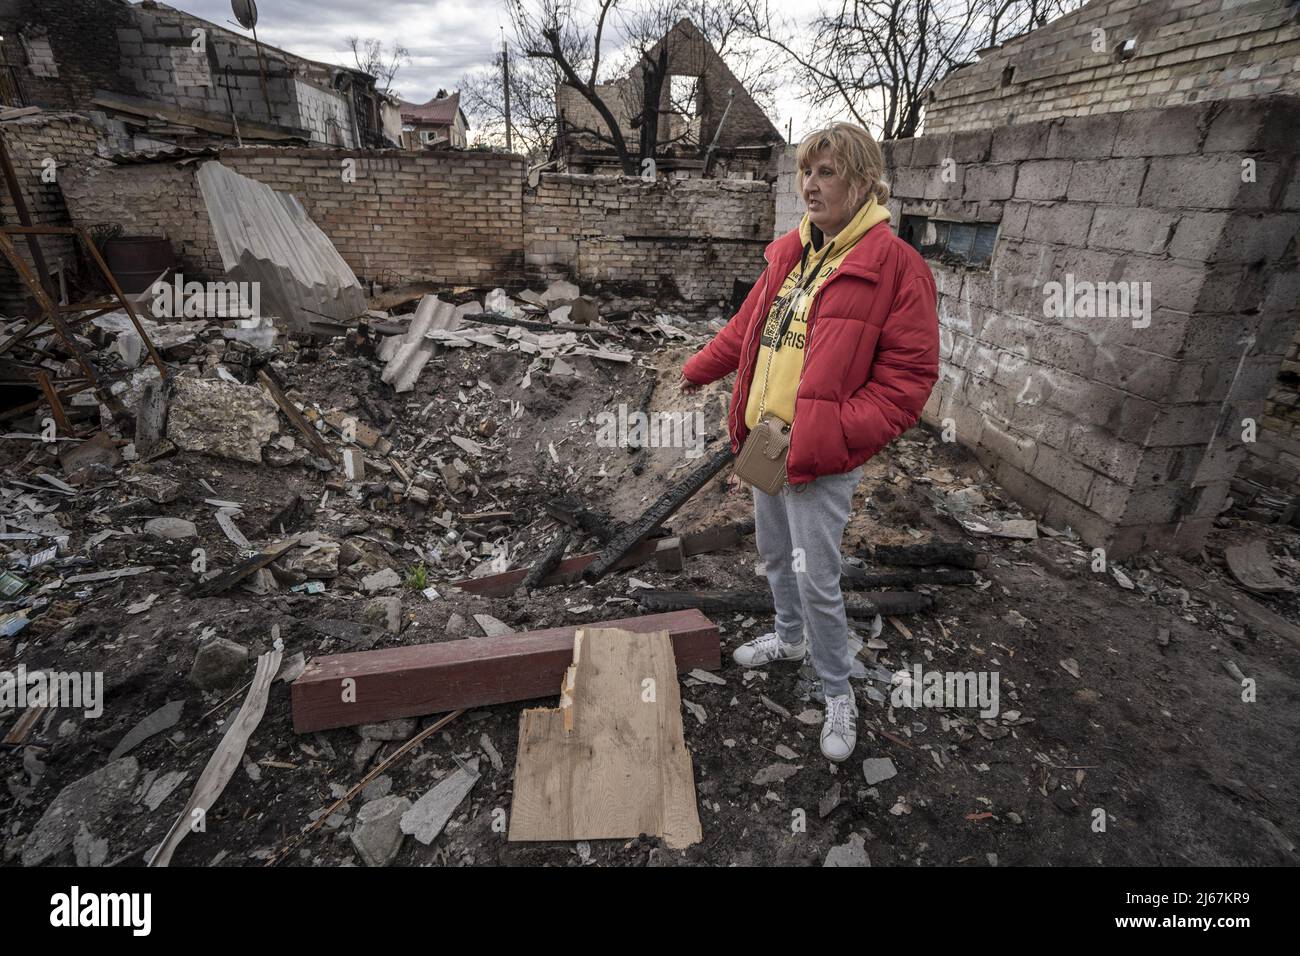 Irpin, Ukraine. 28th Apr, 2022. Natalia Tsyukalo, 62, demonstrates how she hid in her cellar from the Russian shelling that hit the apartments across the street from her home in Irpin, Ukraine April 27, 2022. The United States has credible evidence of Russian troops executing surrendering Ukrainians in Donetsk region, a U.S. official told U.N. member states seeking to hold those responsible for war crimes committed by Russia to account. Credit: UPI/Alamy Live News Stock Photo